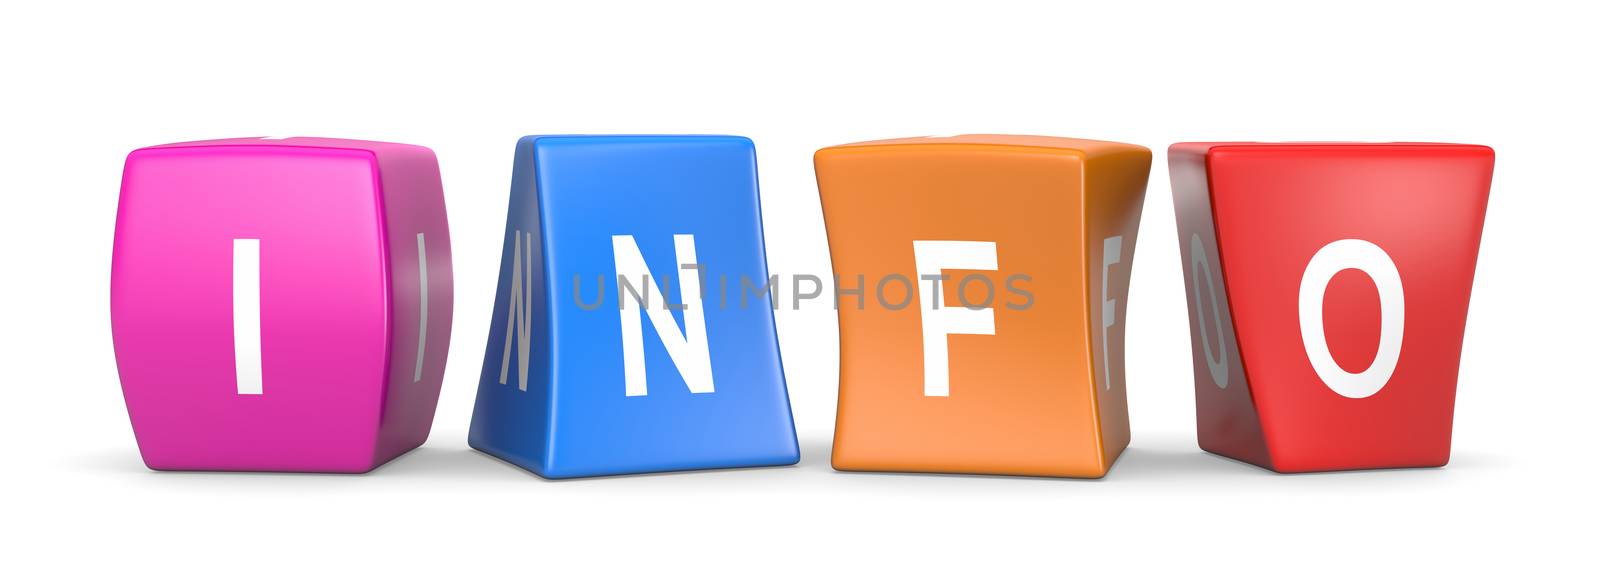 Info White Text on Colorful Deformed Funny Cubes 3D Illustration on White Background